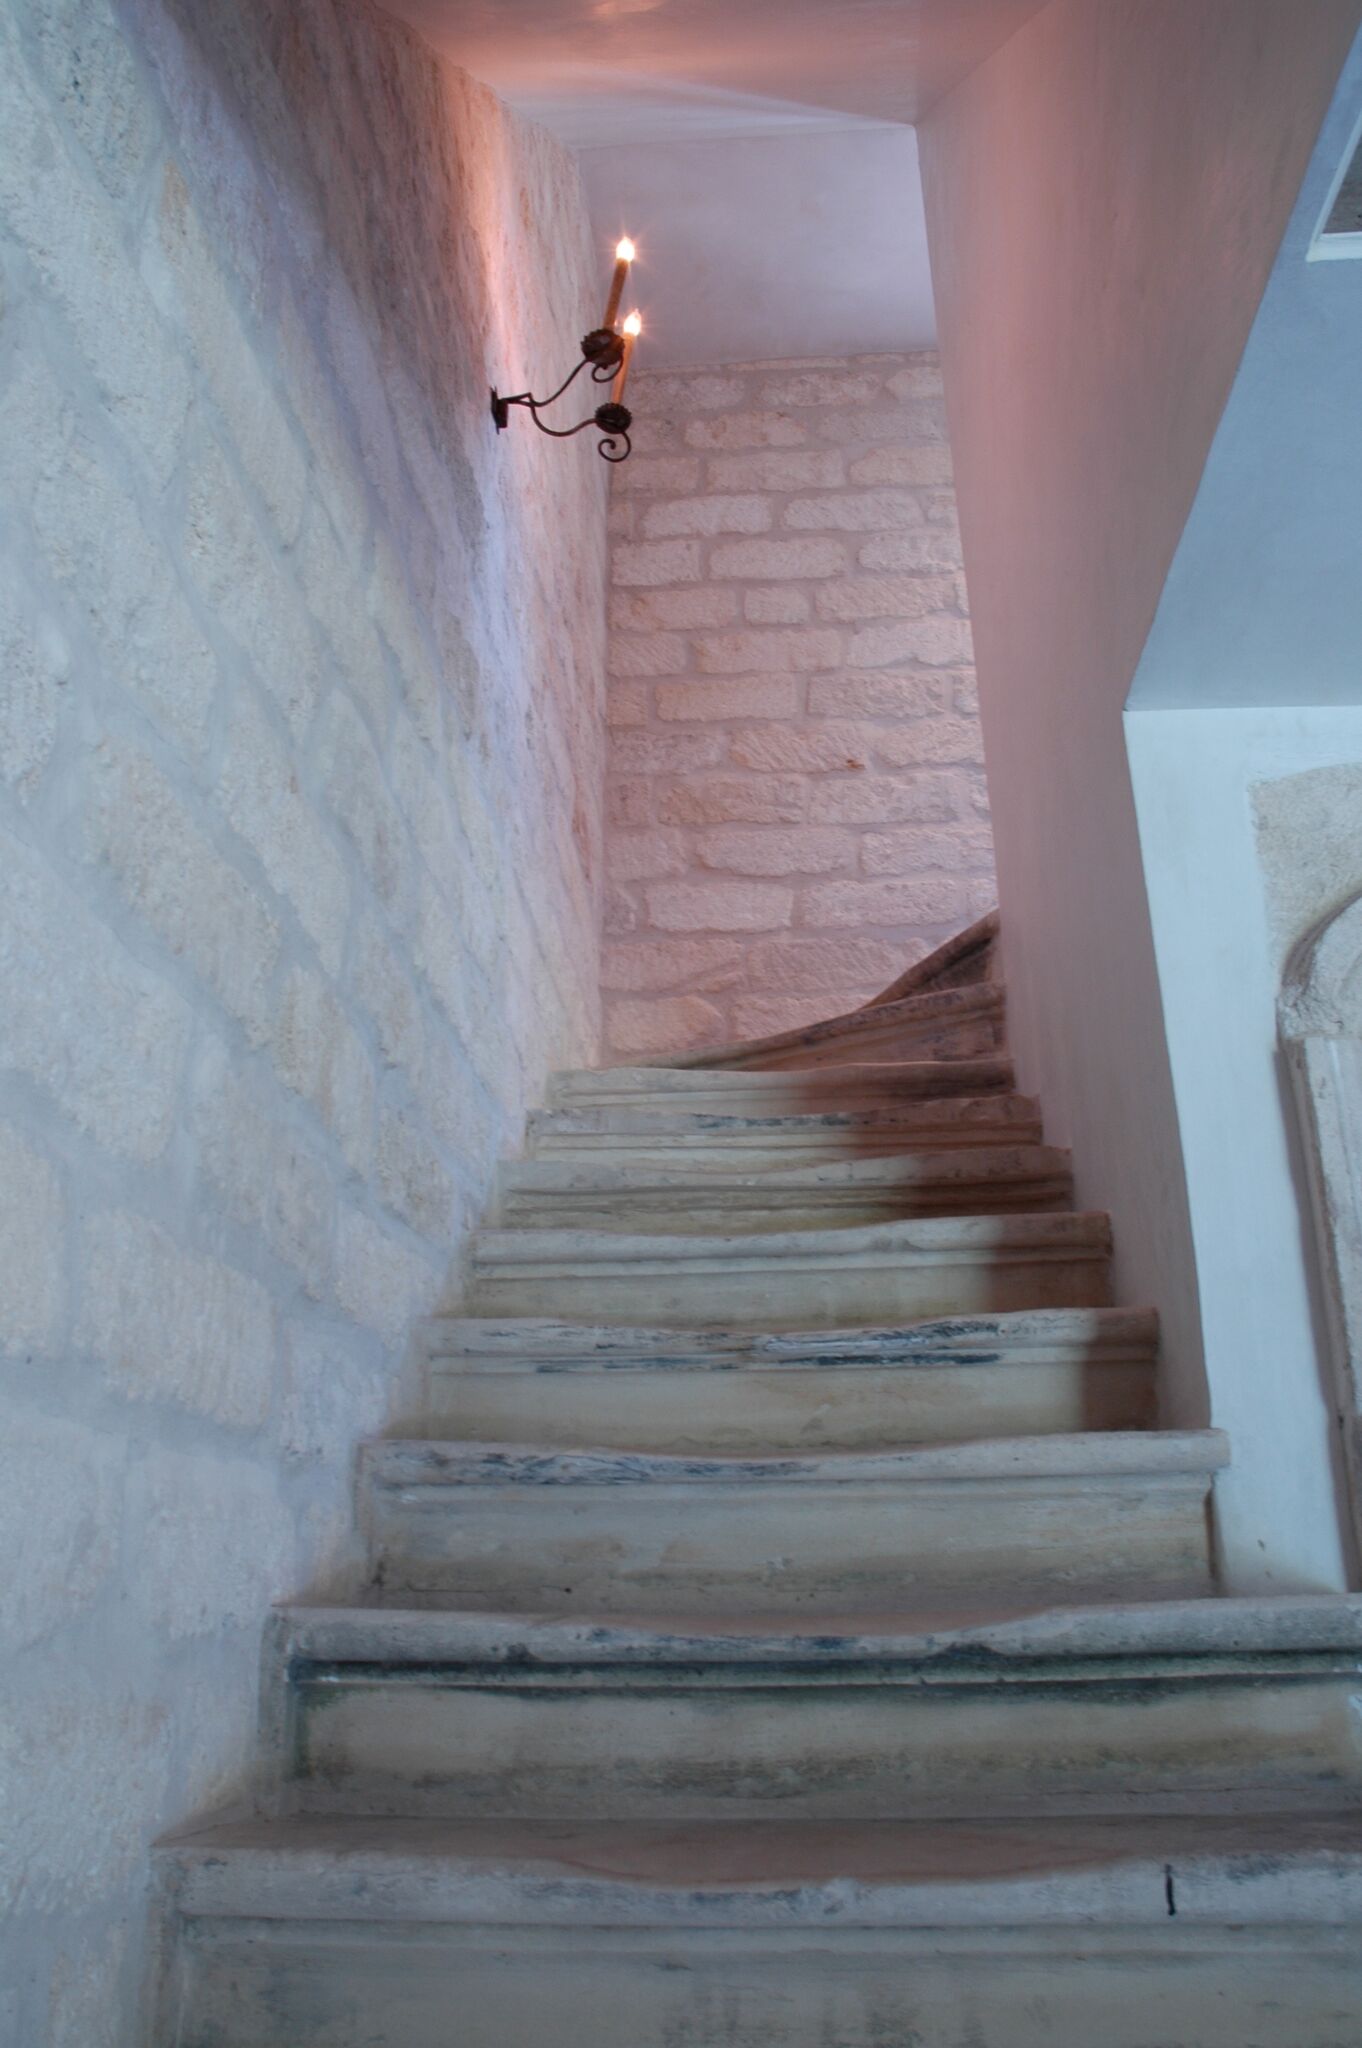 A stone staircase in a magnificent French country home. Chateau Domingues. #chateaudomingue #staircase #reclaimedstone #pamelapierce #staircase